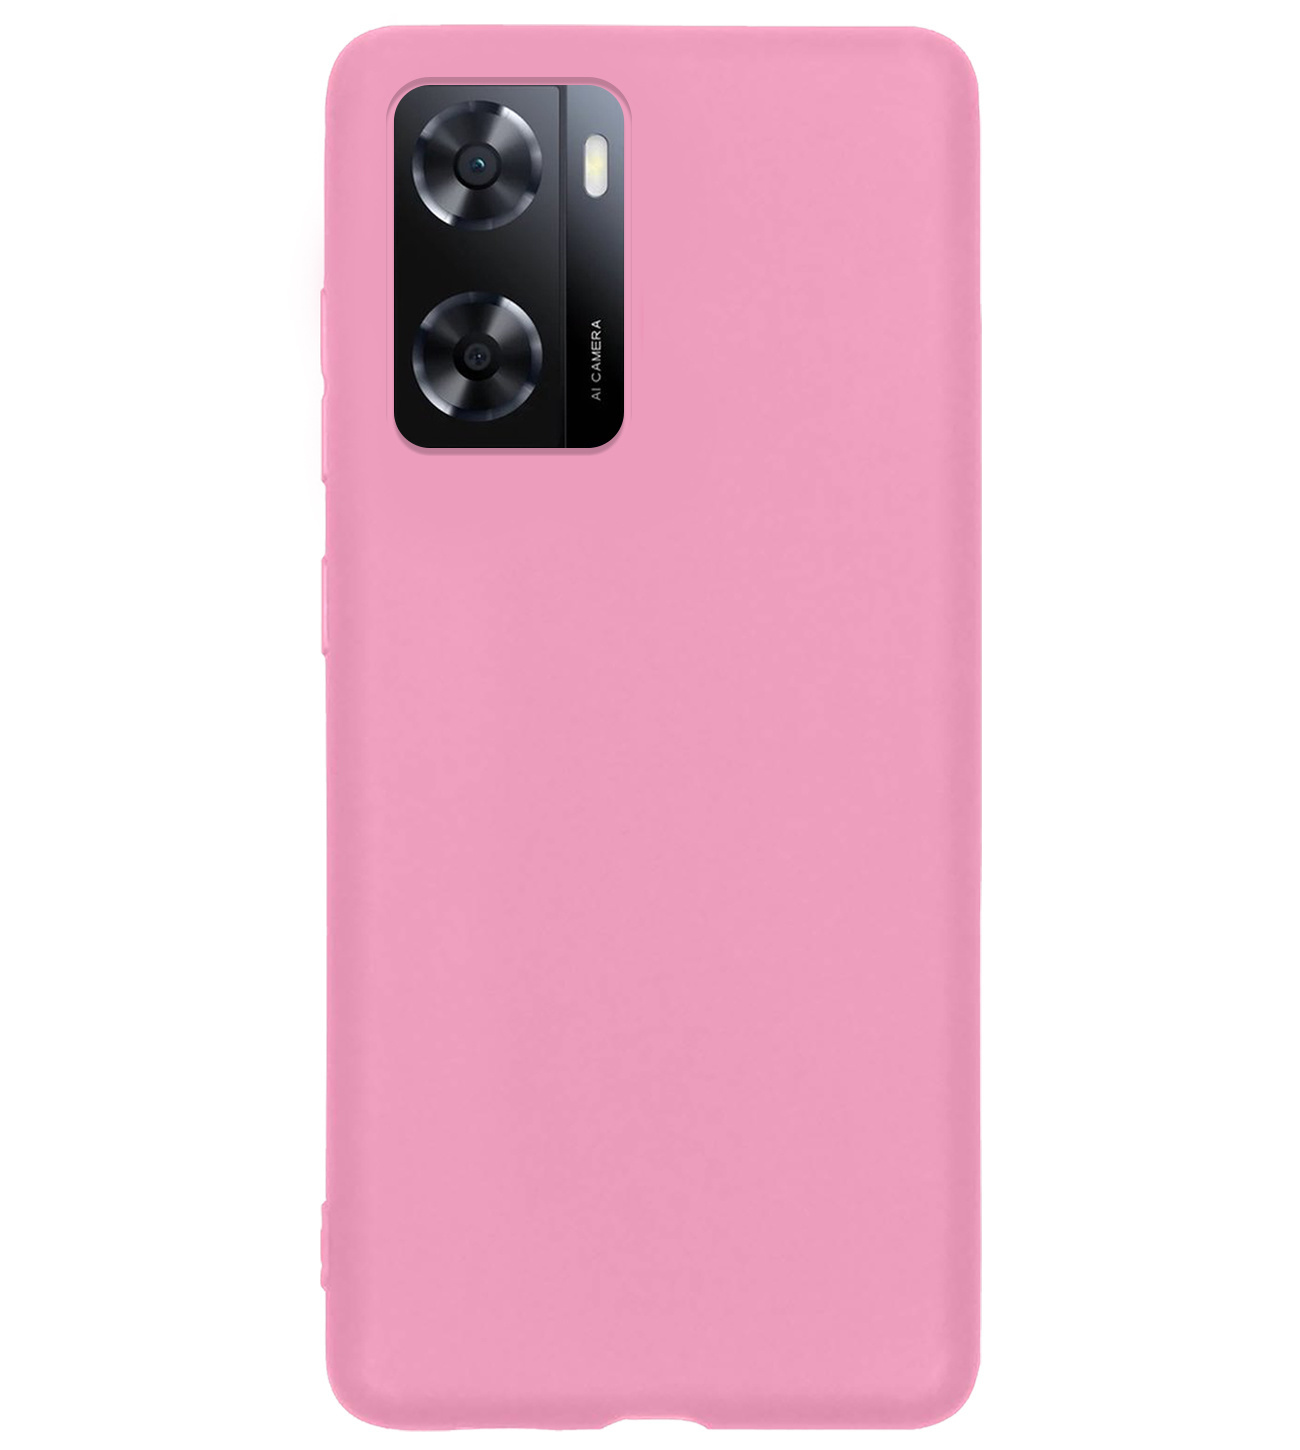 BASEY. OPPO A57s Hoesje Siliconen Back Cover Case - OPPO A57s Hoes Silicone Case Hoesje - Licht Roze - 2 Stuks